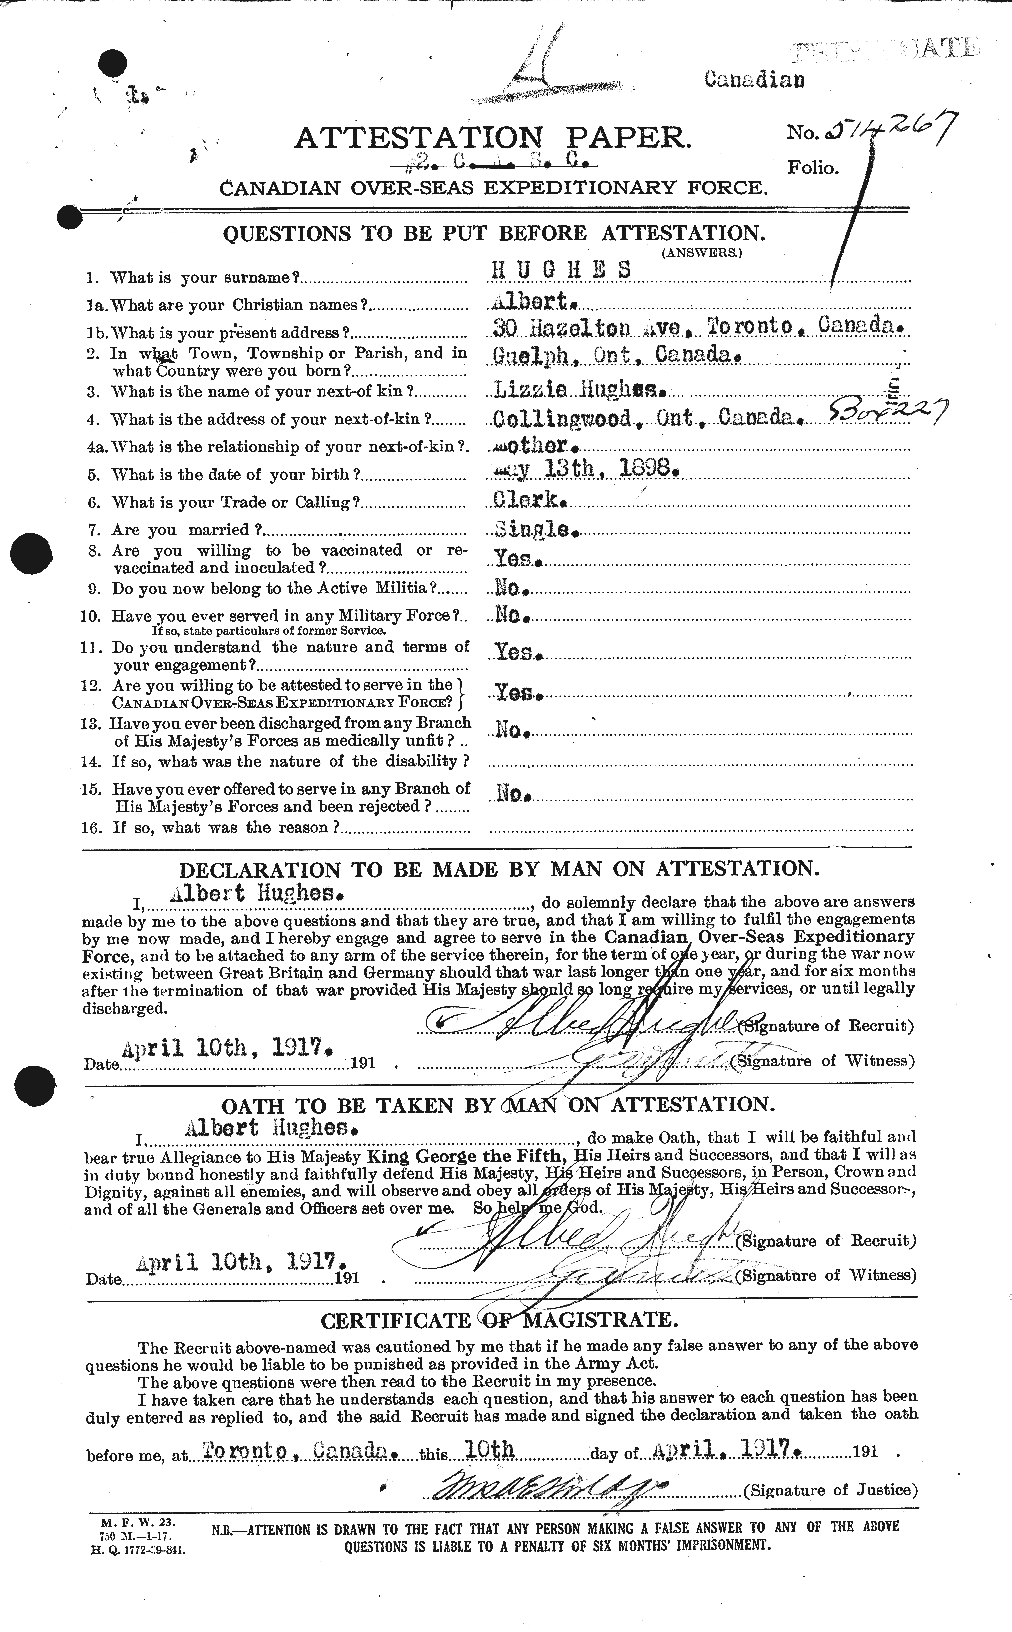 Personnel Records of the First World War - CEF 402515a